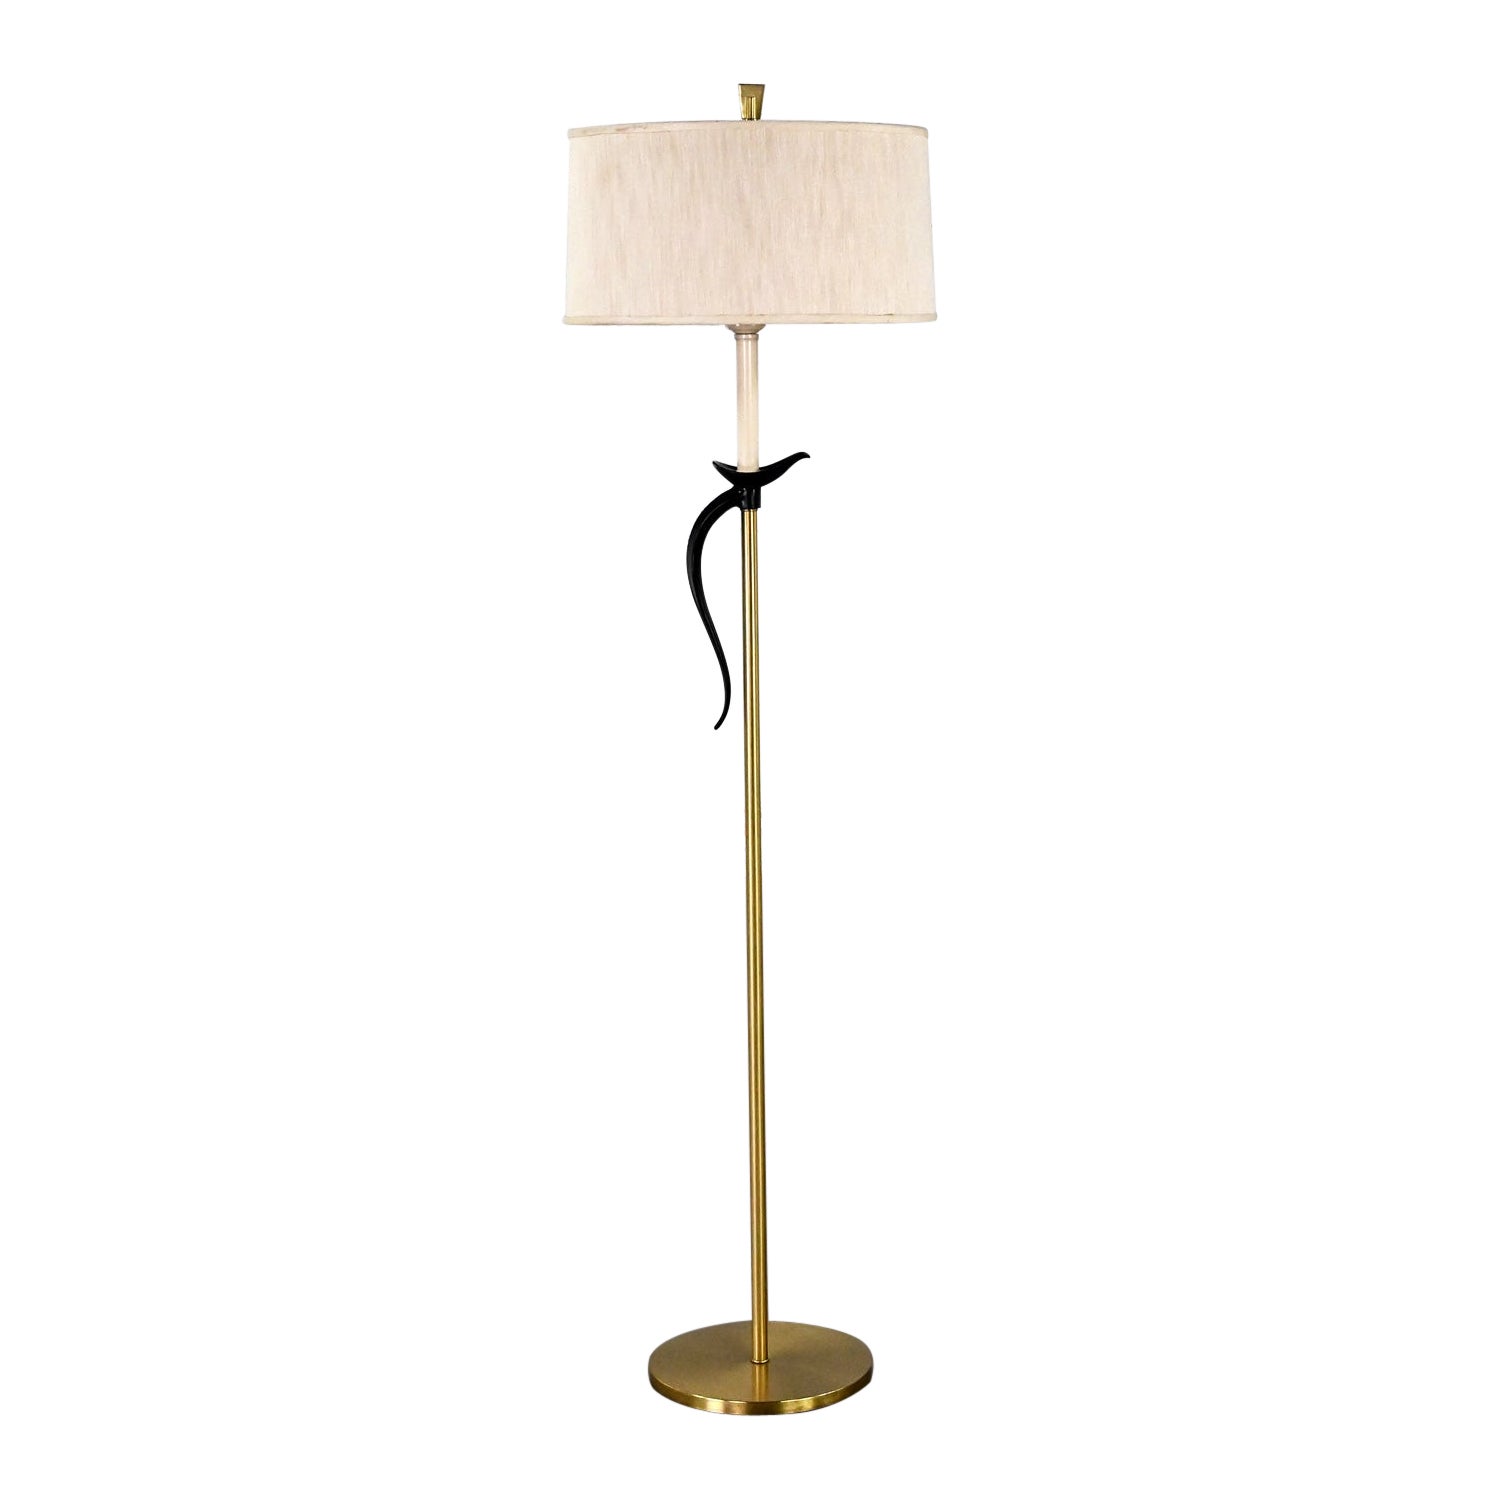 1950-1960’s MCM Floor Lamp Brass Plated & Black Pheasant Tail Accent Drum Shade For Sale